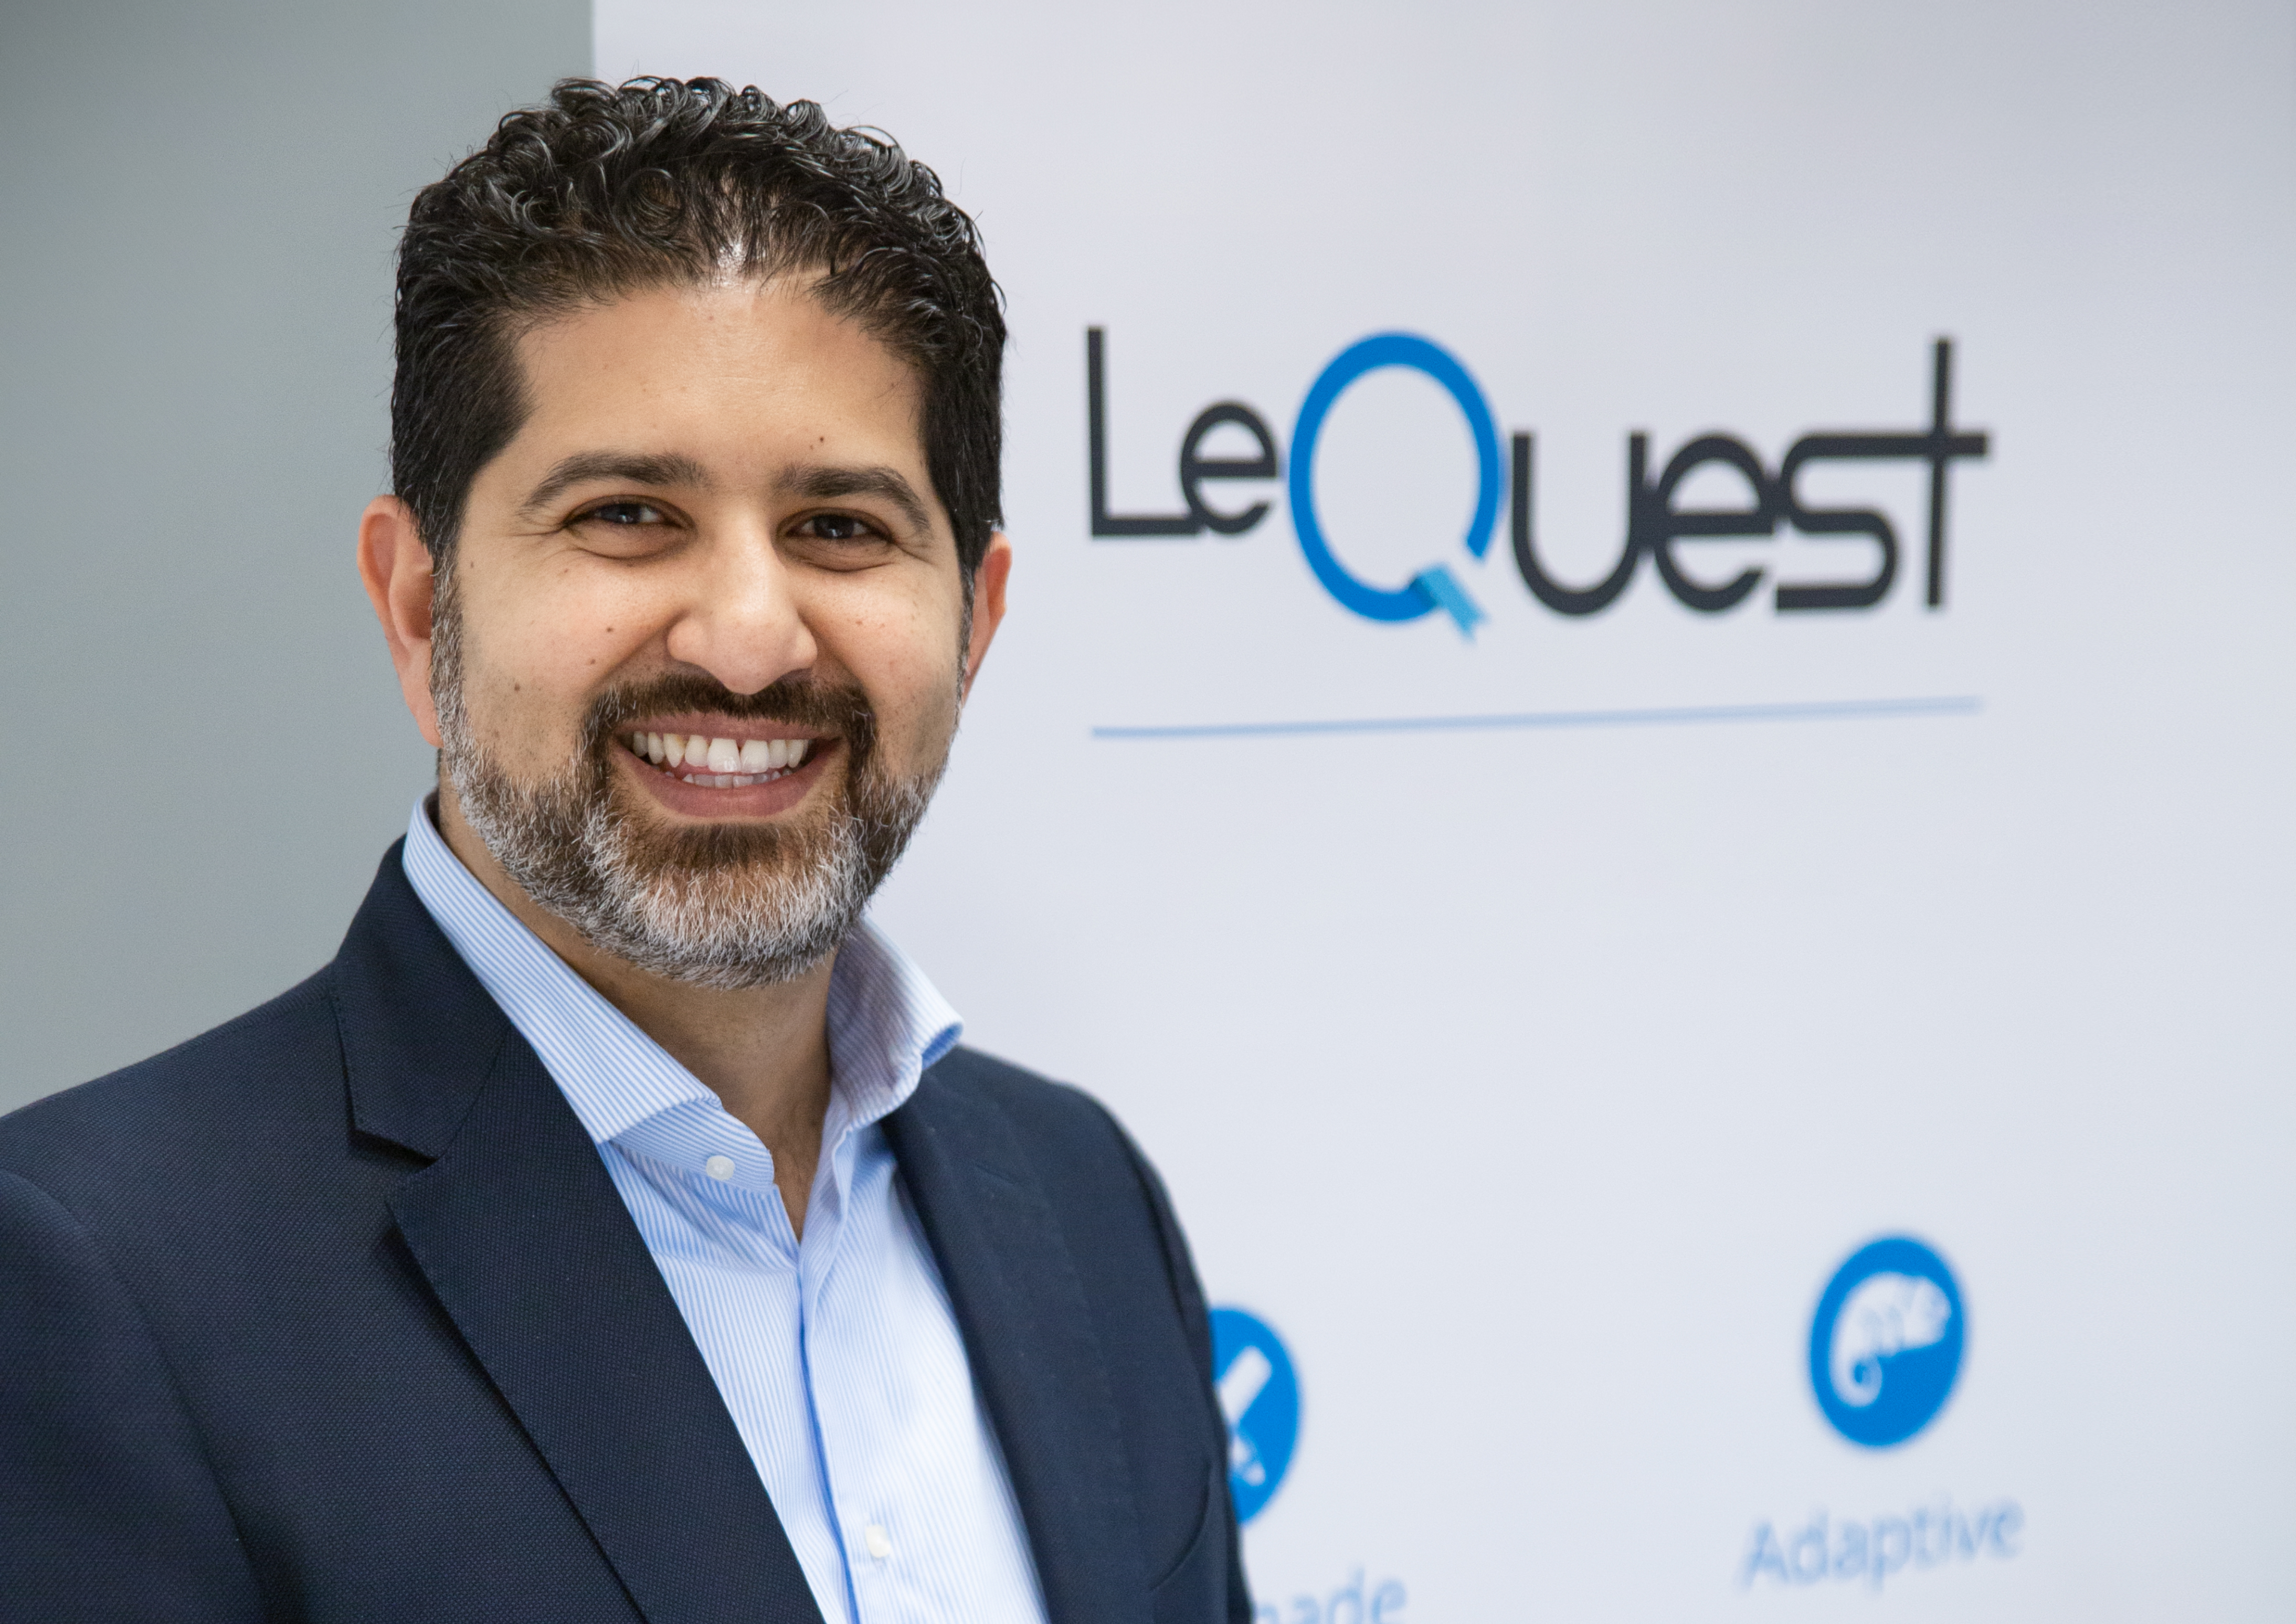 LeQuest raises €7 million to expand its leadership in medical technology education
